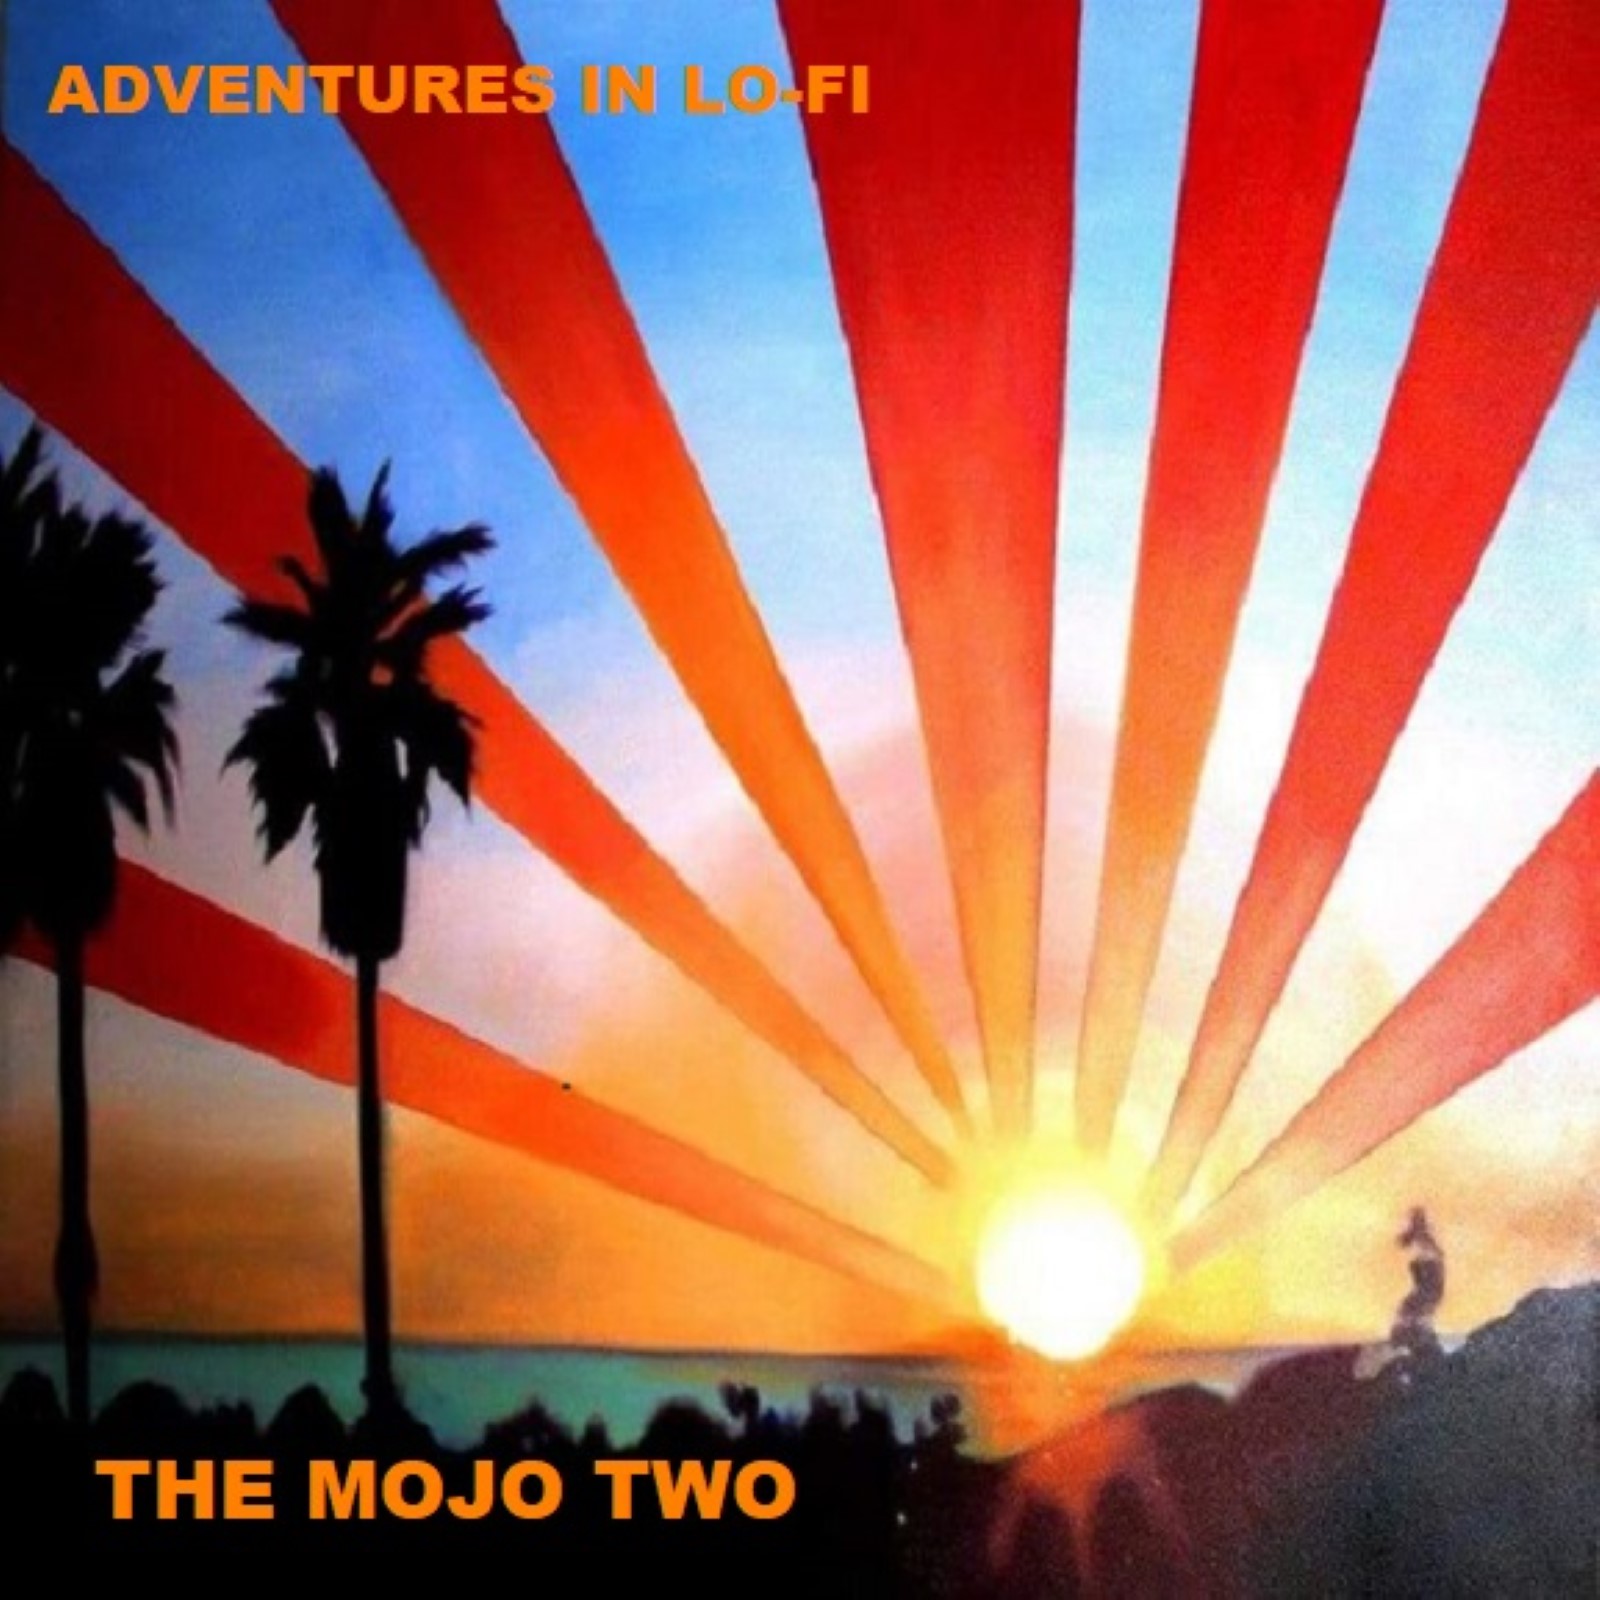 The Mojo Two: adventures in lo-fi